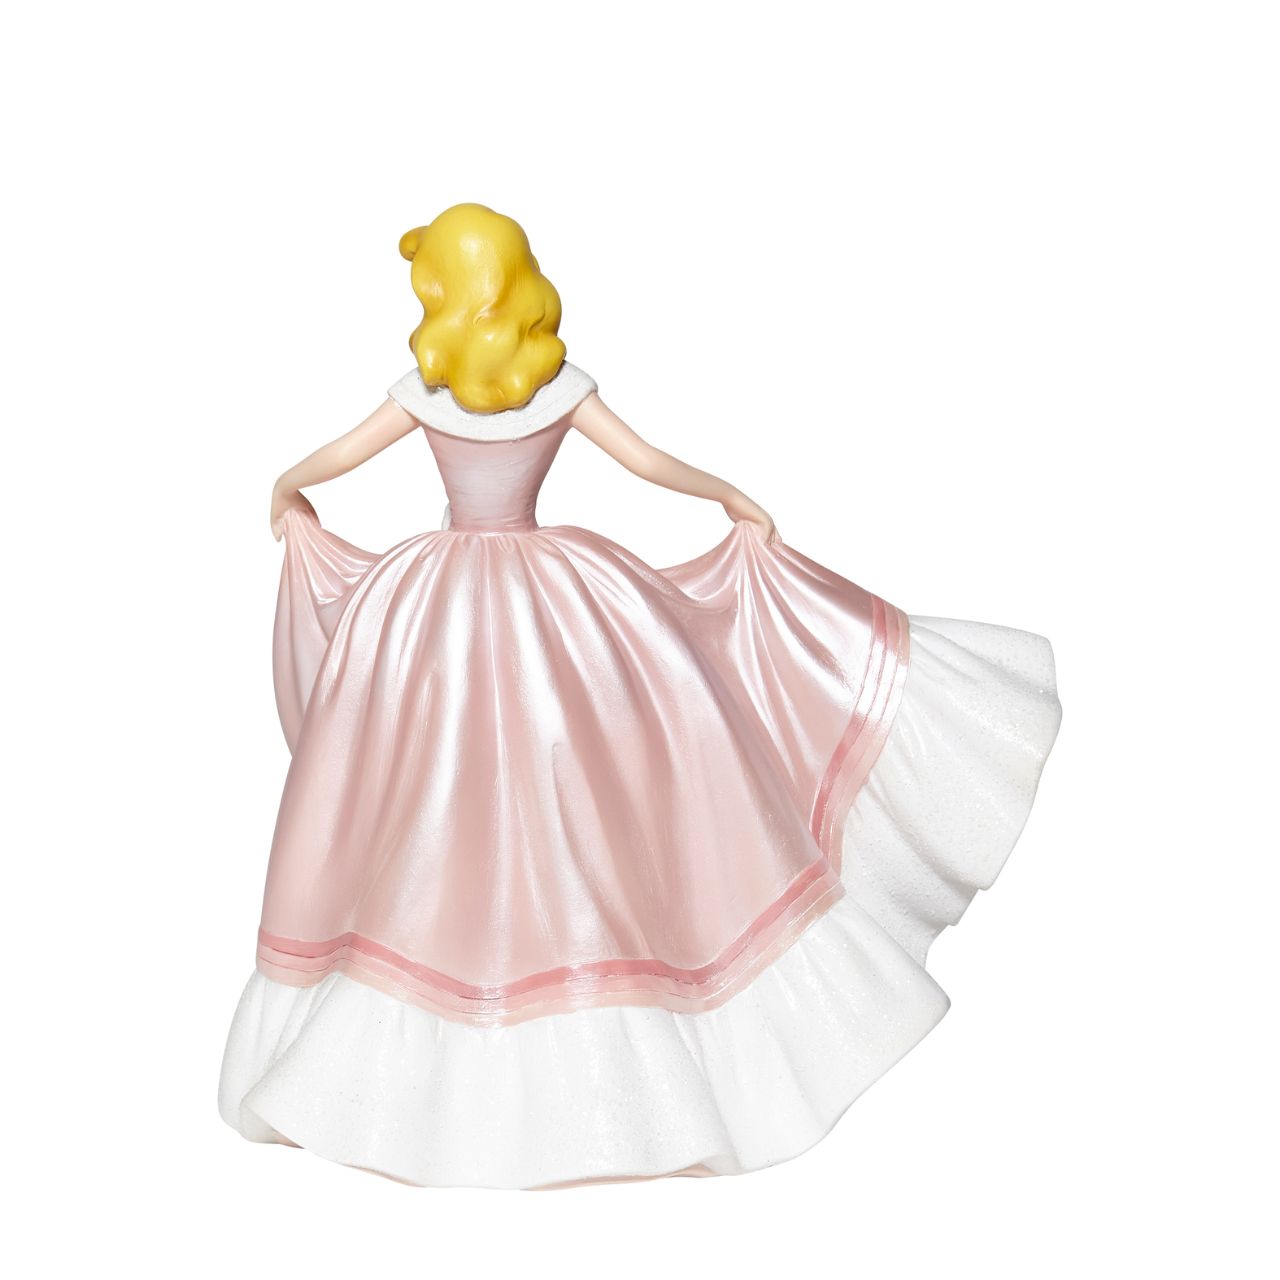 Cinderella in Pink Dress Couture de Force Figurine  Disney Couture de Force celebrates the 70th Anniversary of Cinderella. She is captured here in her classic pink gown of "what might have been." With the help of her mice tailors, the dress shimmers with satin finishes, iridescent glitter and jewels. Supplied in branded gift box.